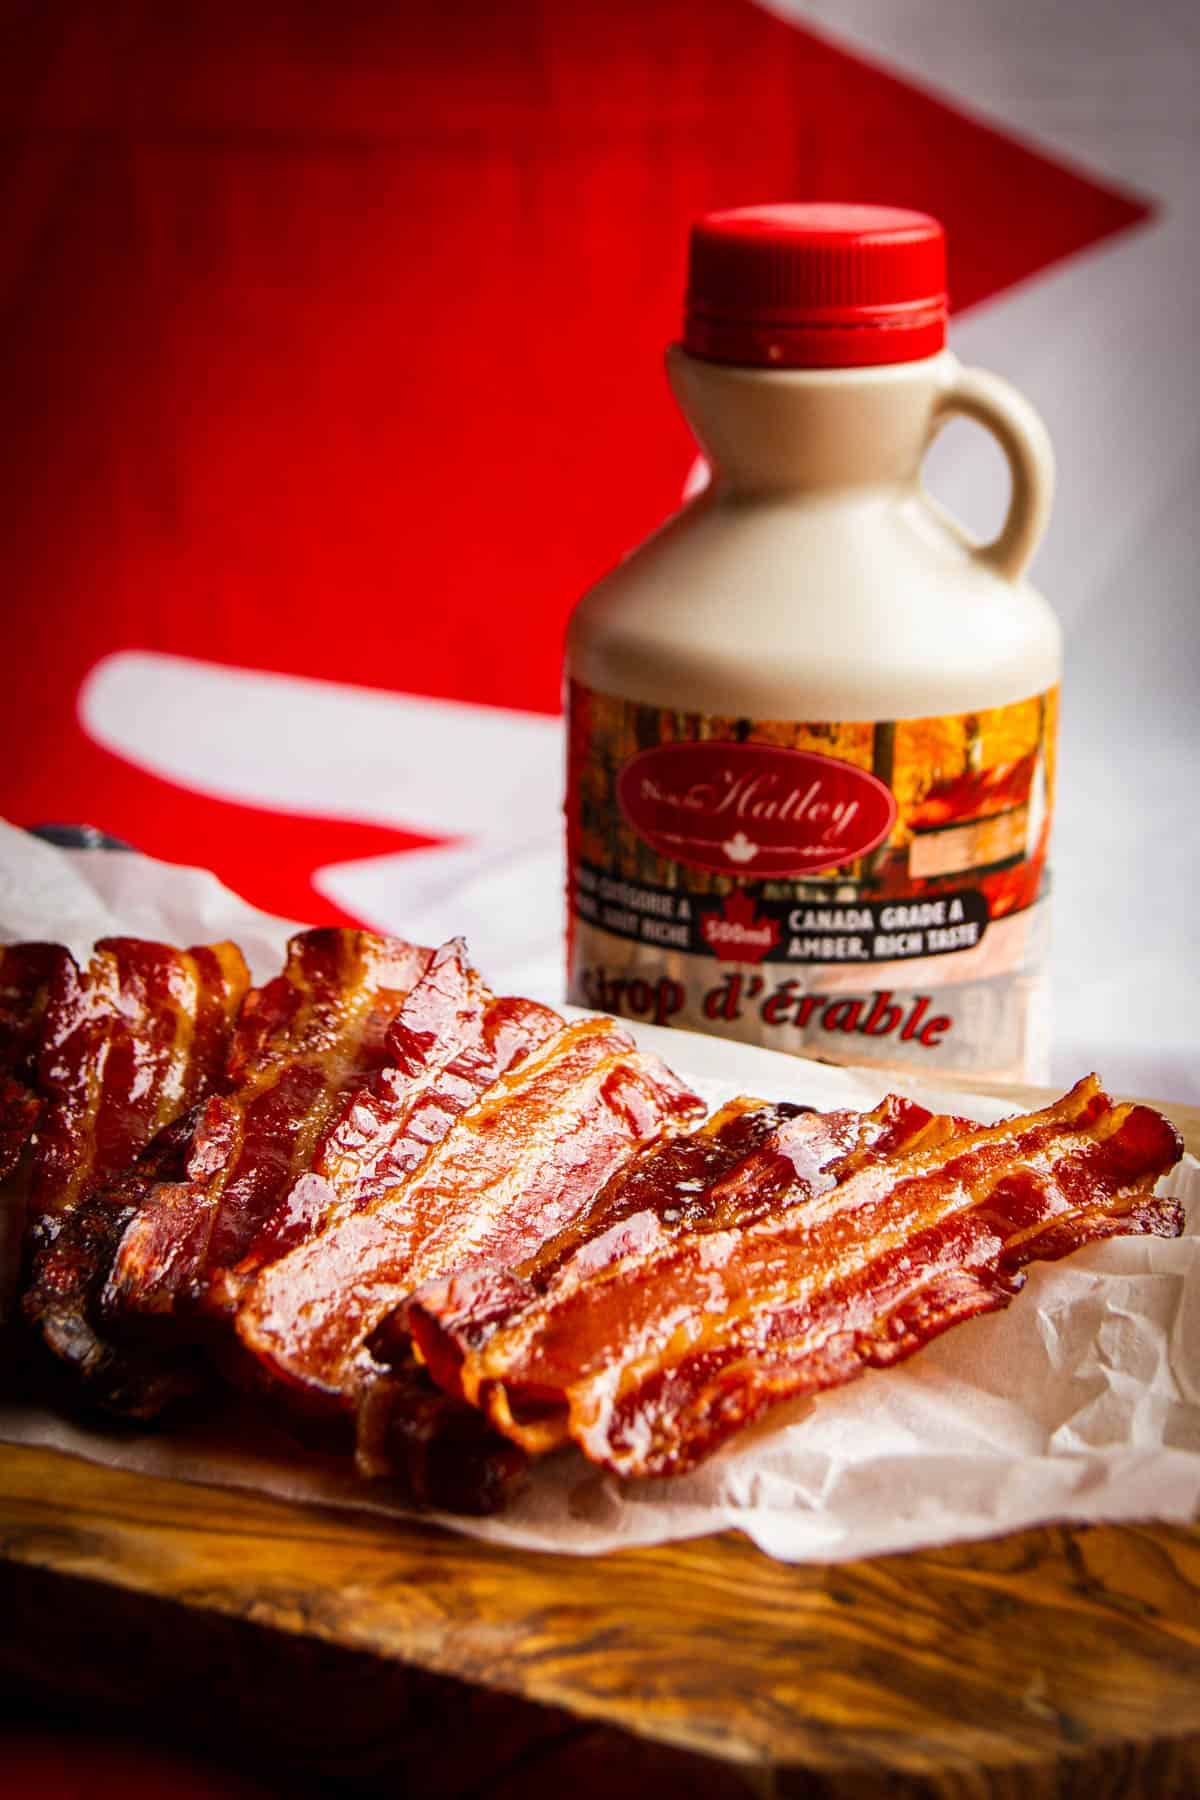 Maple bacon with a bottle of maple syrup in the background.